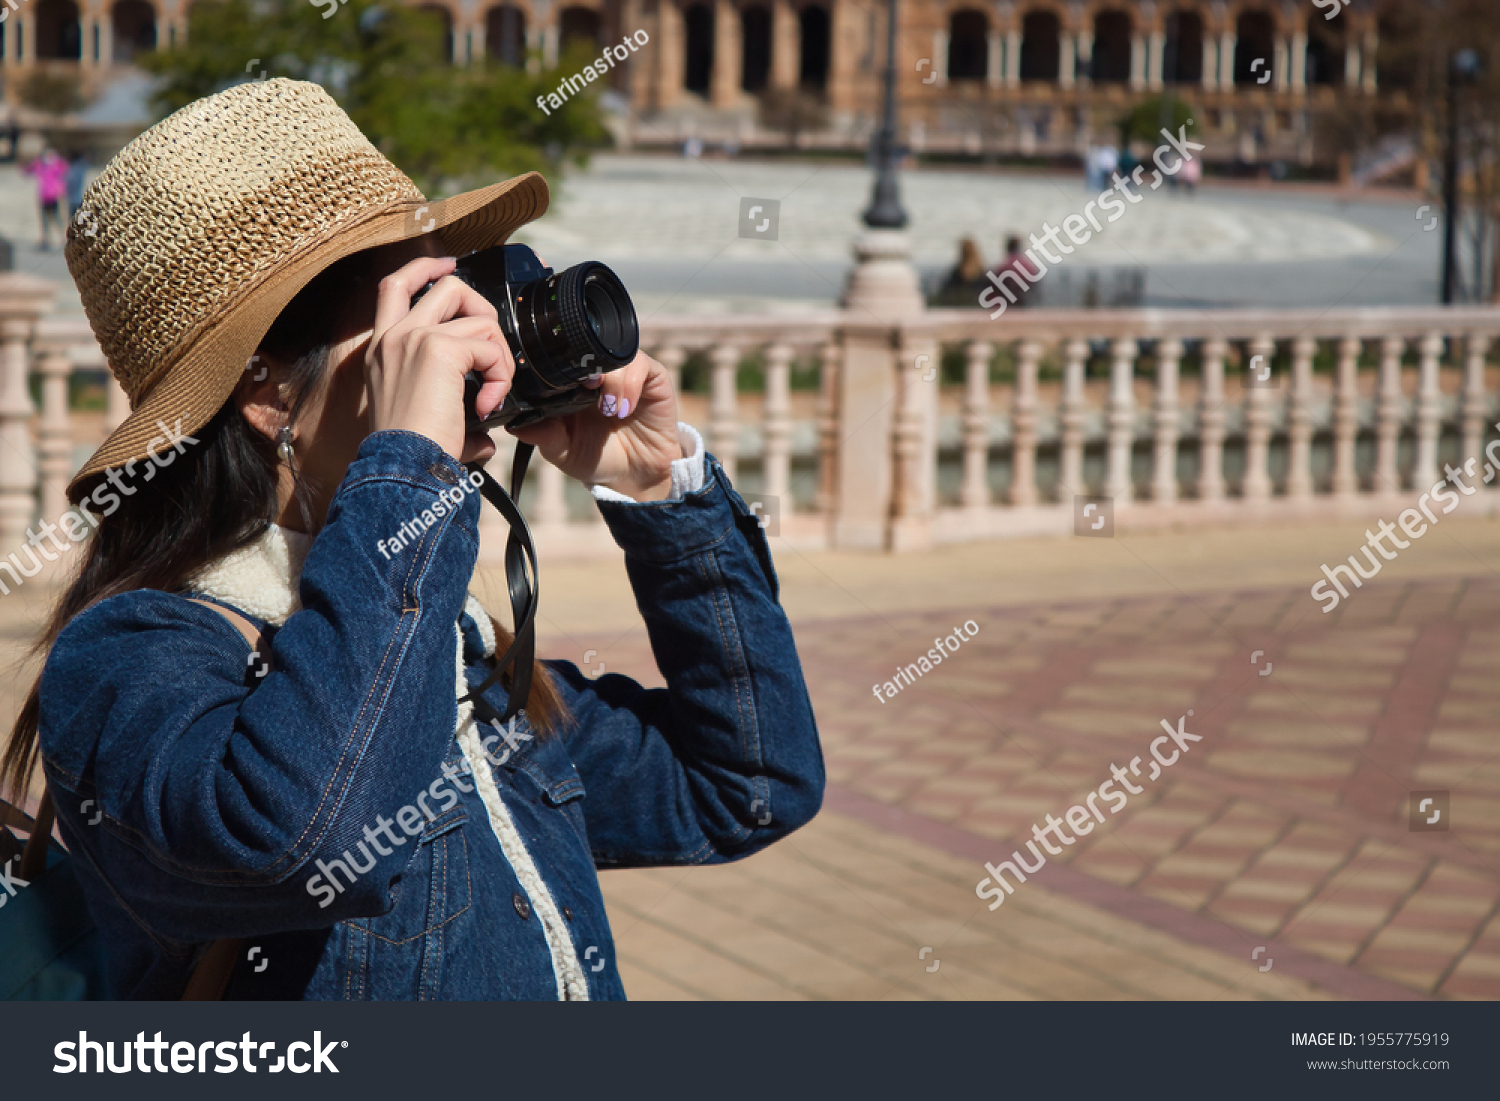 Young and beautiful asian tourist taking photos of monument with reflex camera during her vacation trip. #1955775919